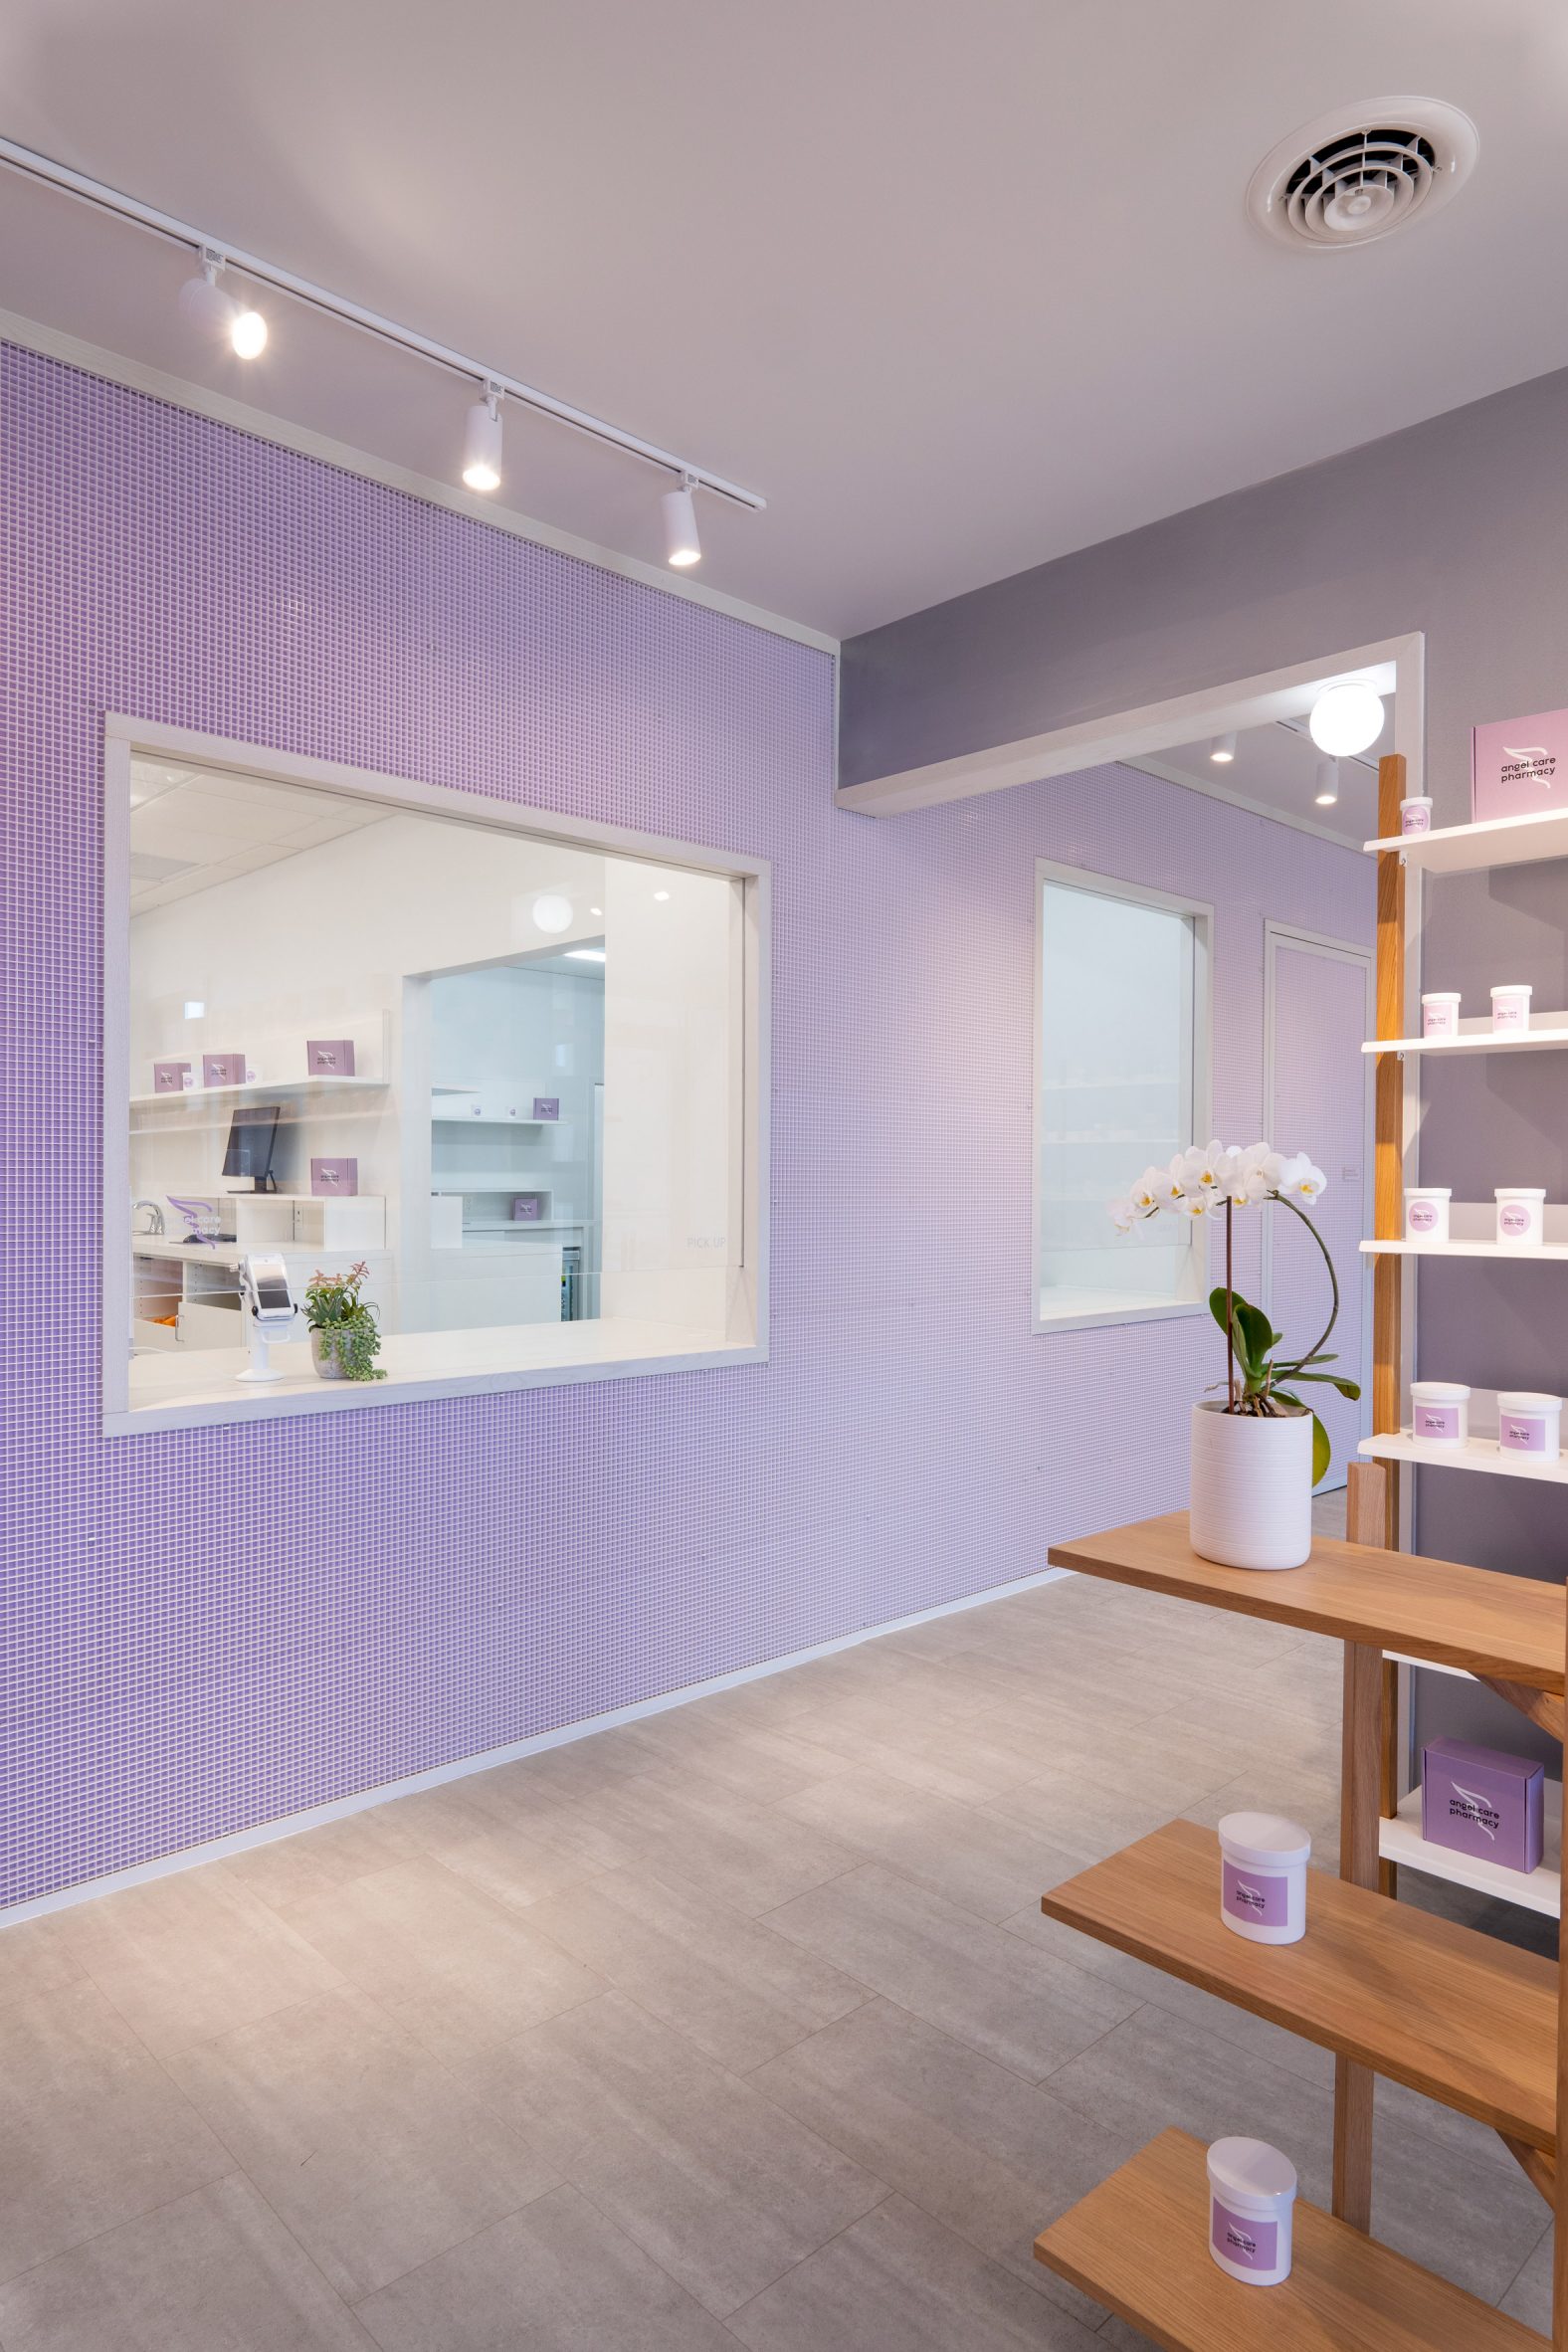 Pharmacy windows surrounded by pale purple walls with a grid overlaid